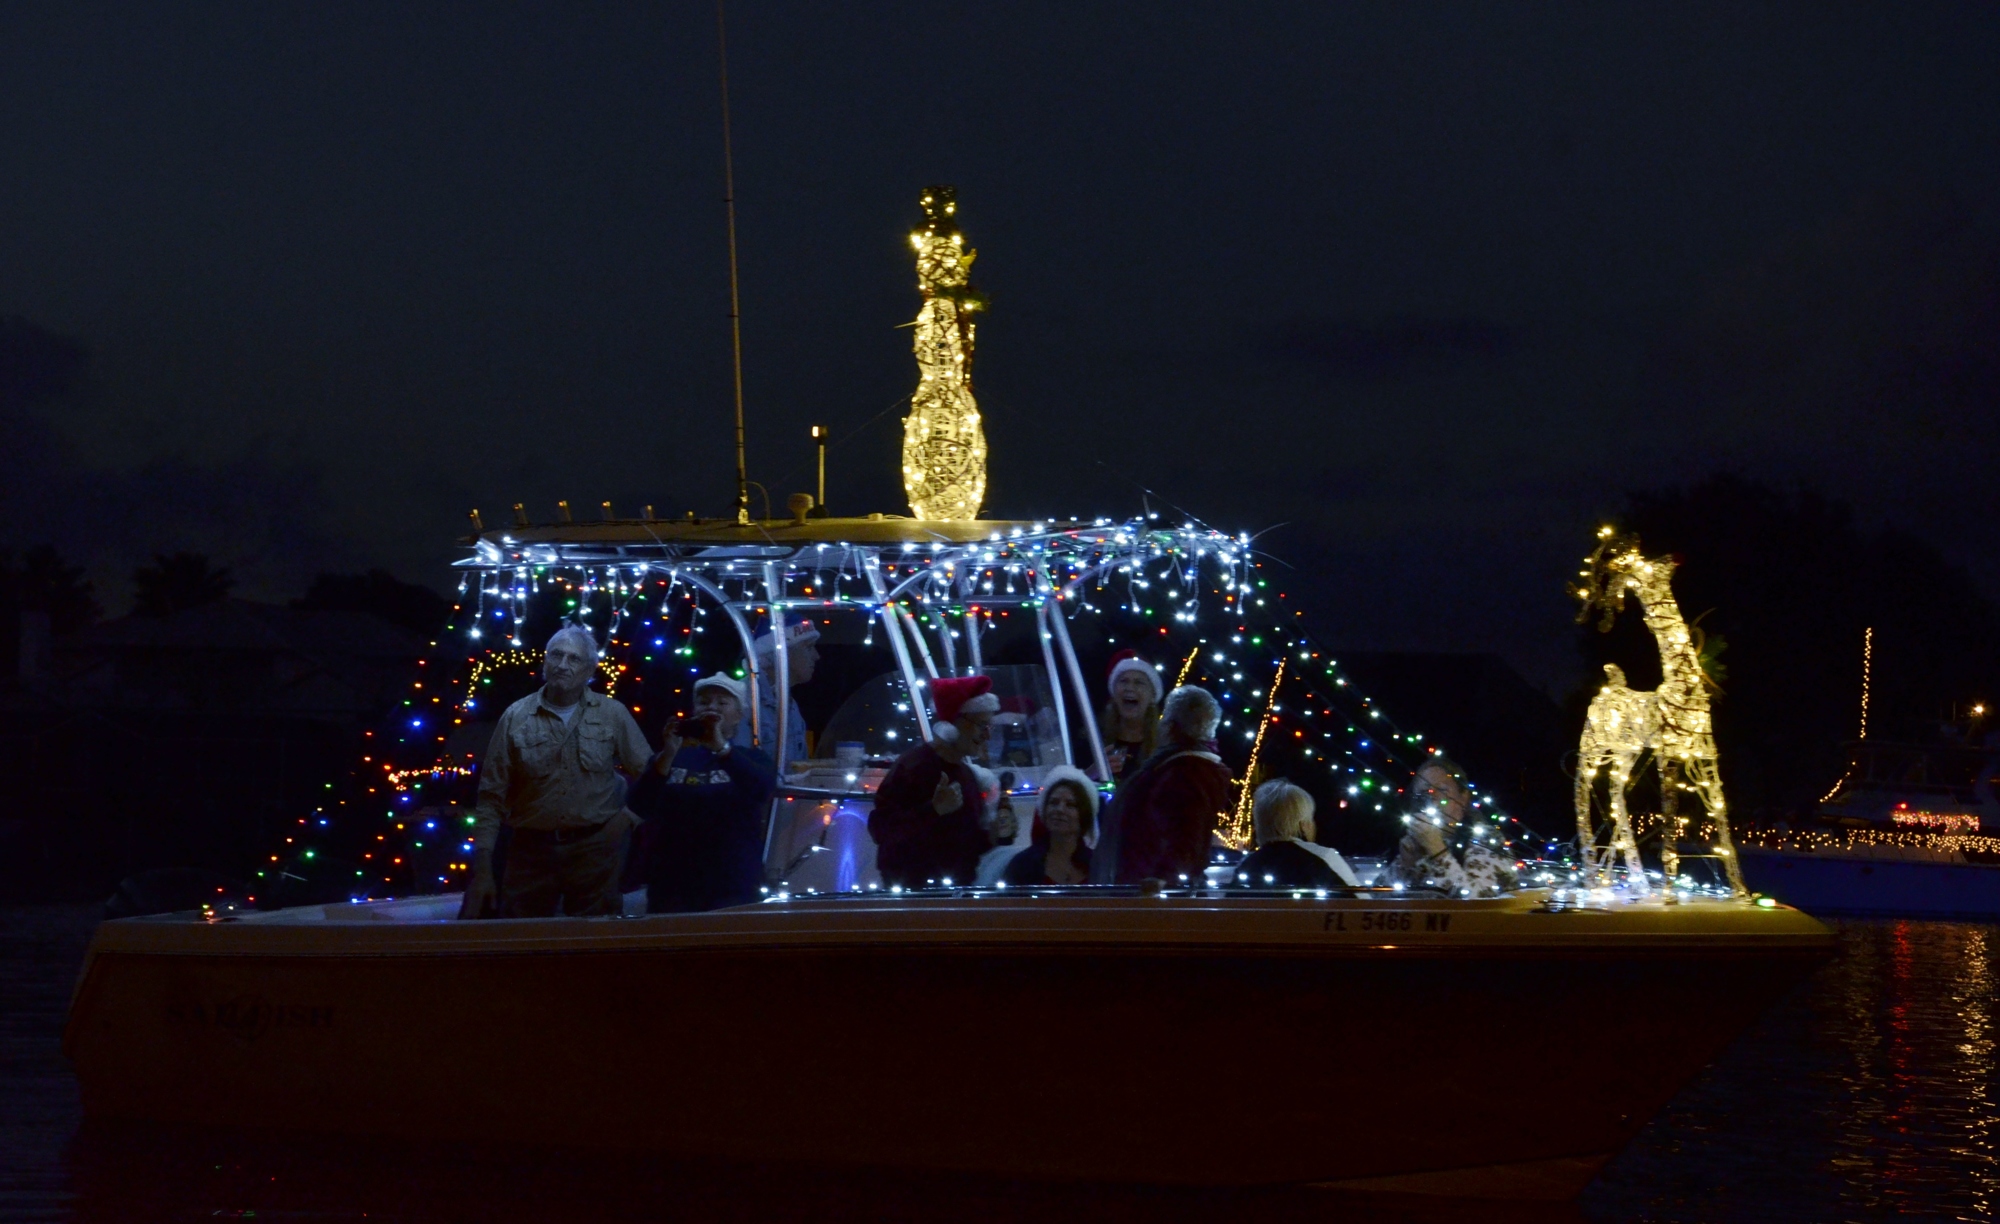 The Palm Cost Yacht Club's 30th-annual Holiday Boat Parade will start at 6 p.m. on the intercoastal waterway. Photo by Anastasia Pagello